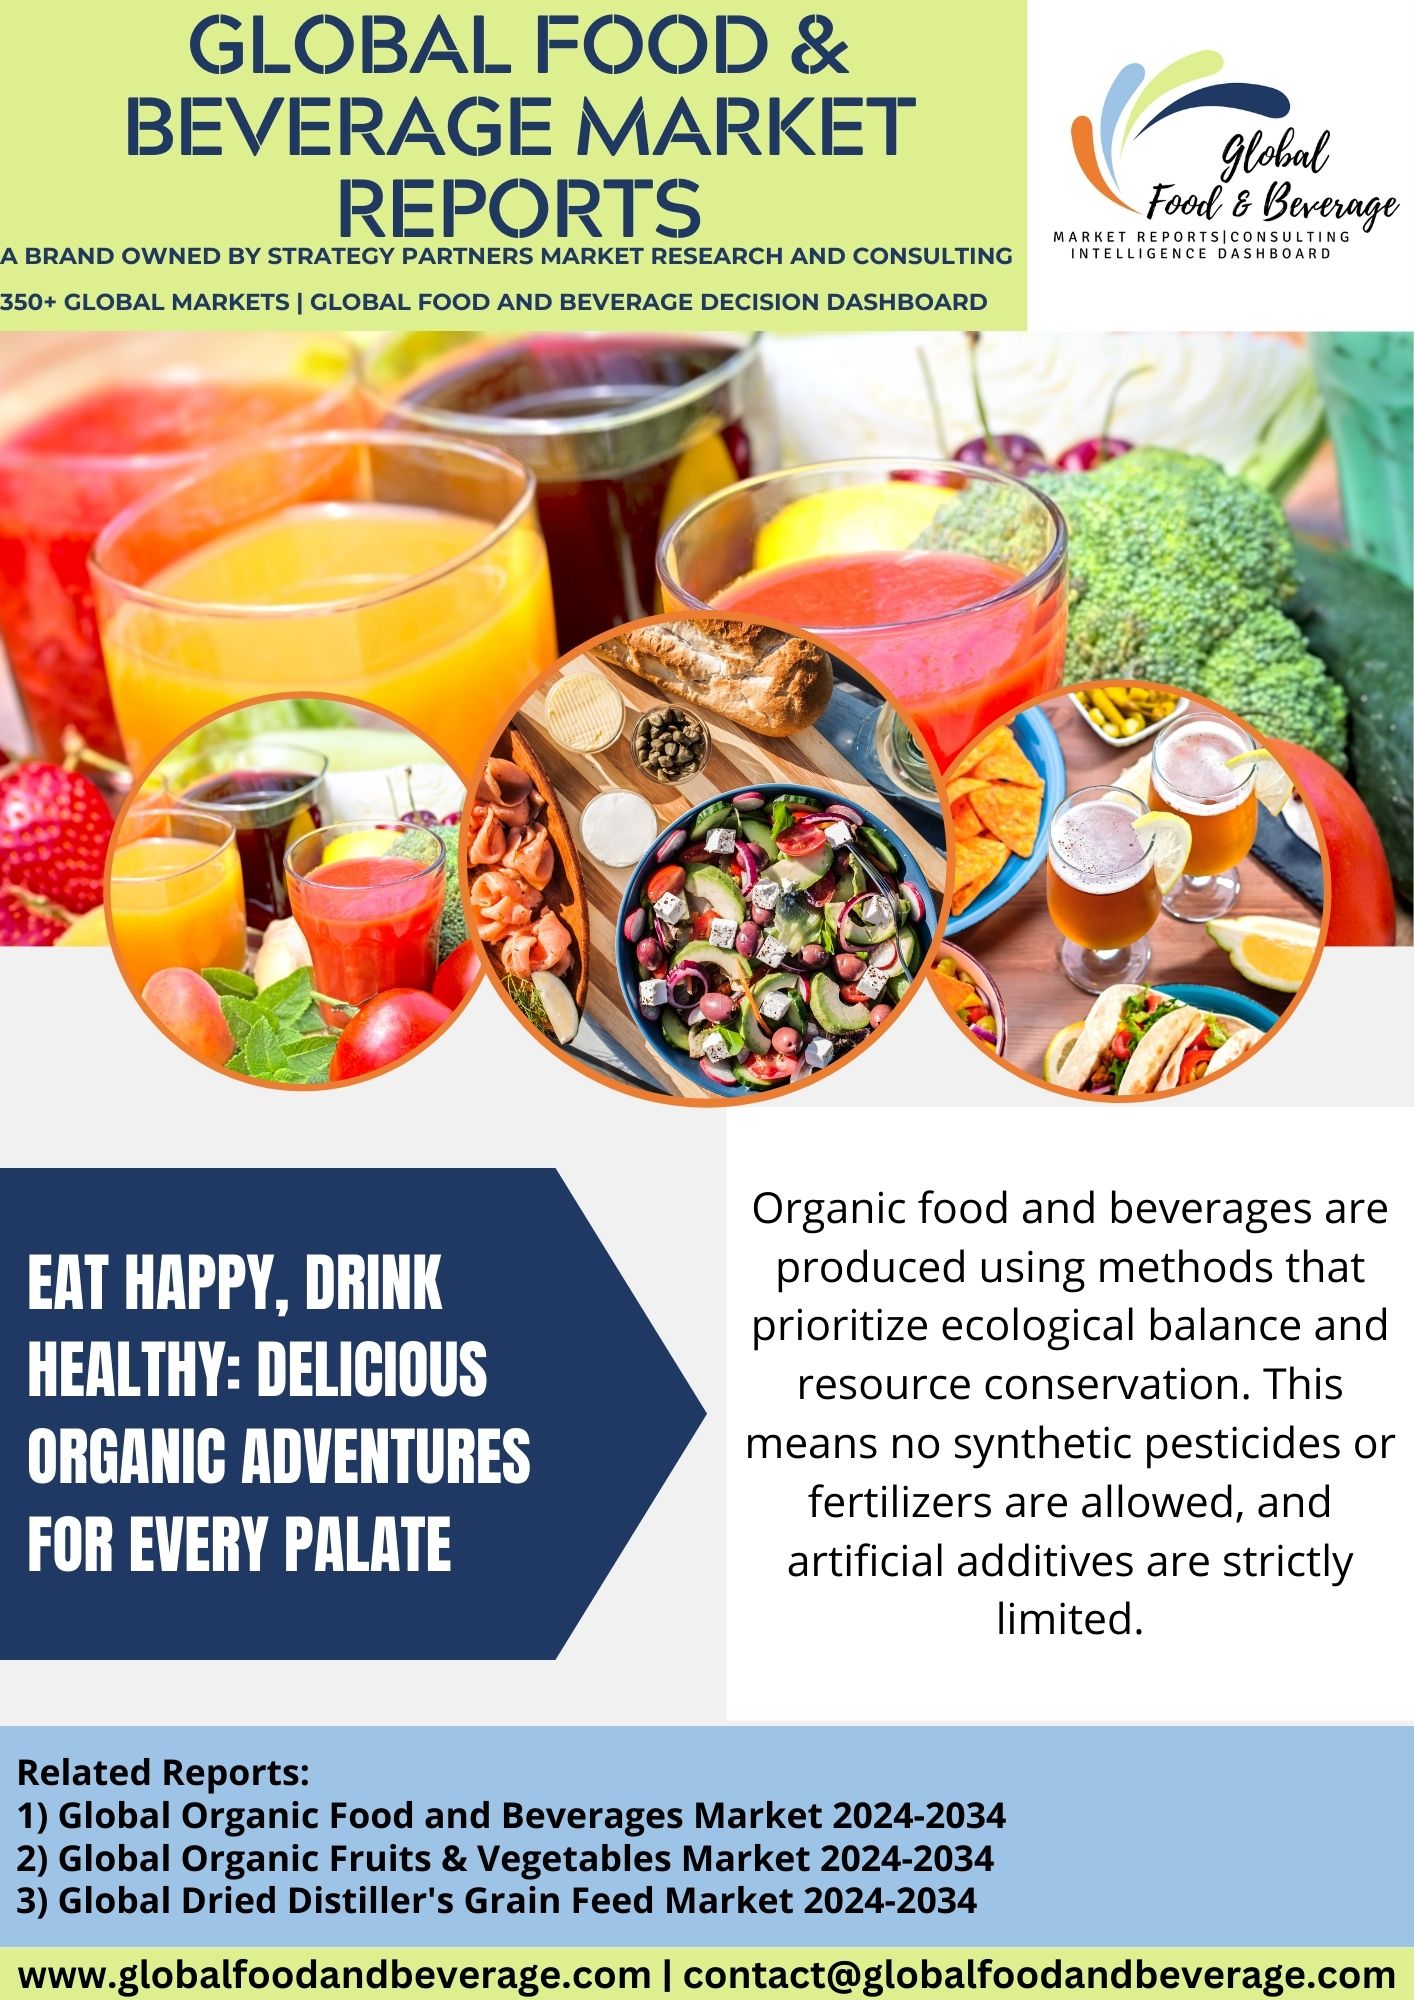 Eat Happy, Drink Healthy: Delicious Organic Adventures for Every Palate